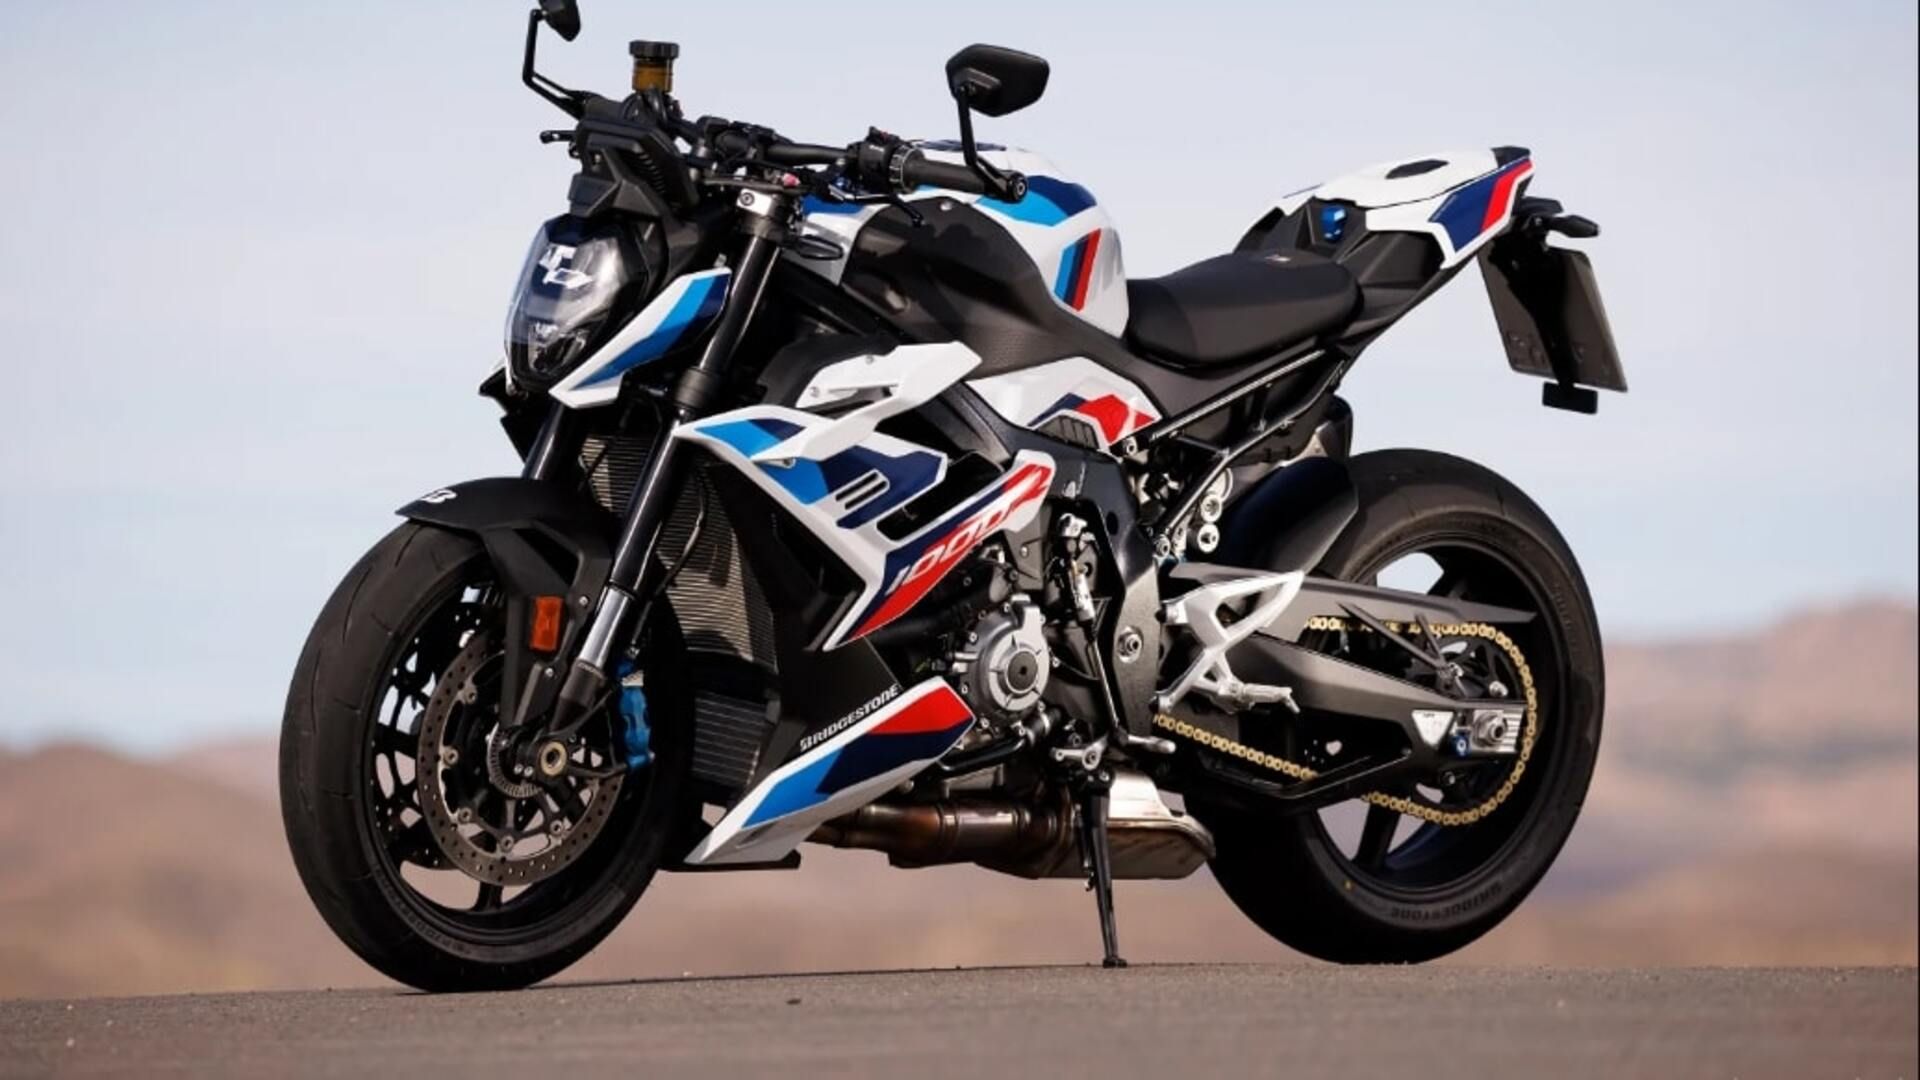 10 Things You Need To Know About The BMW M 1000 R